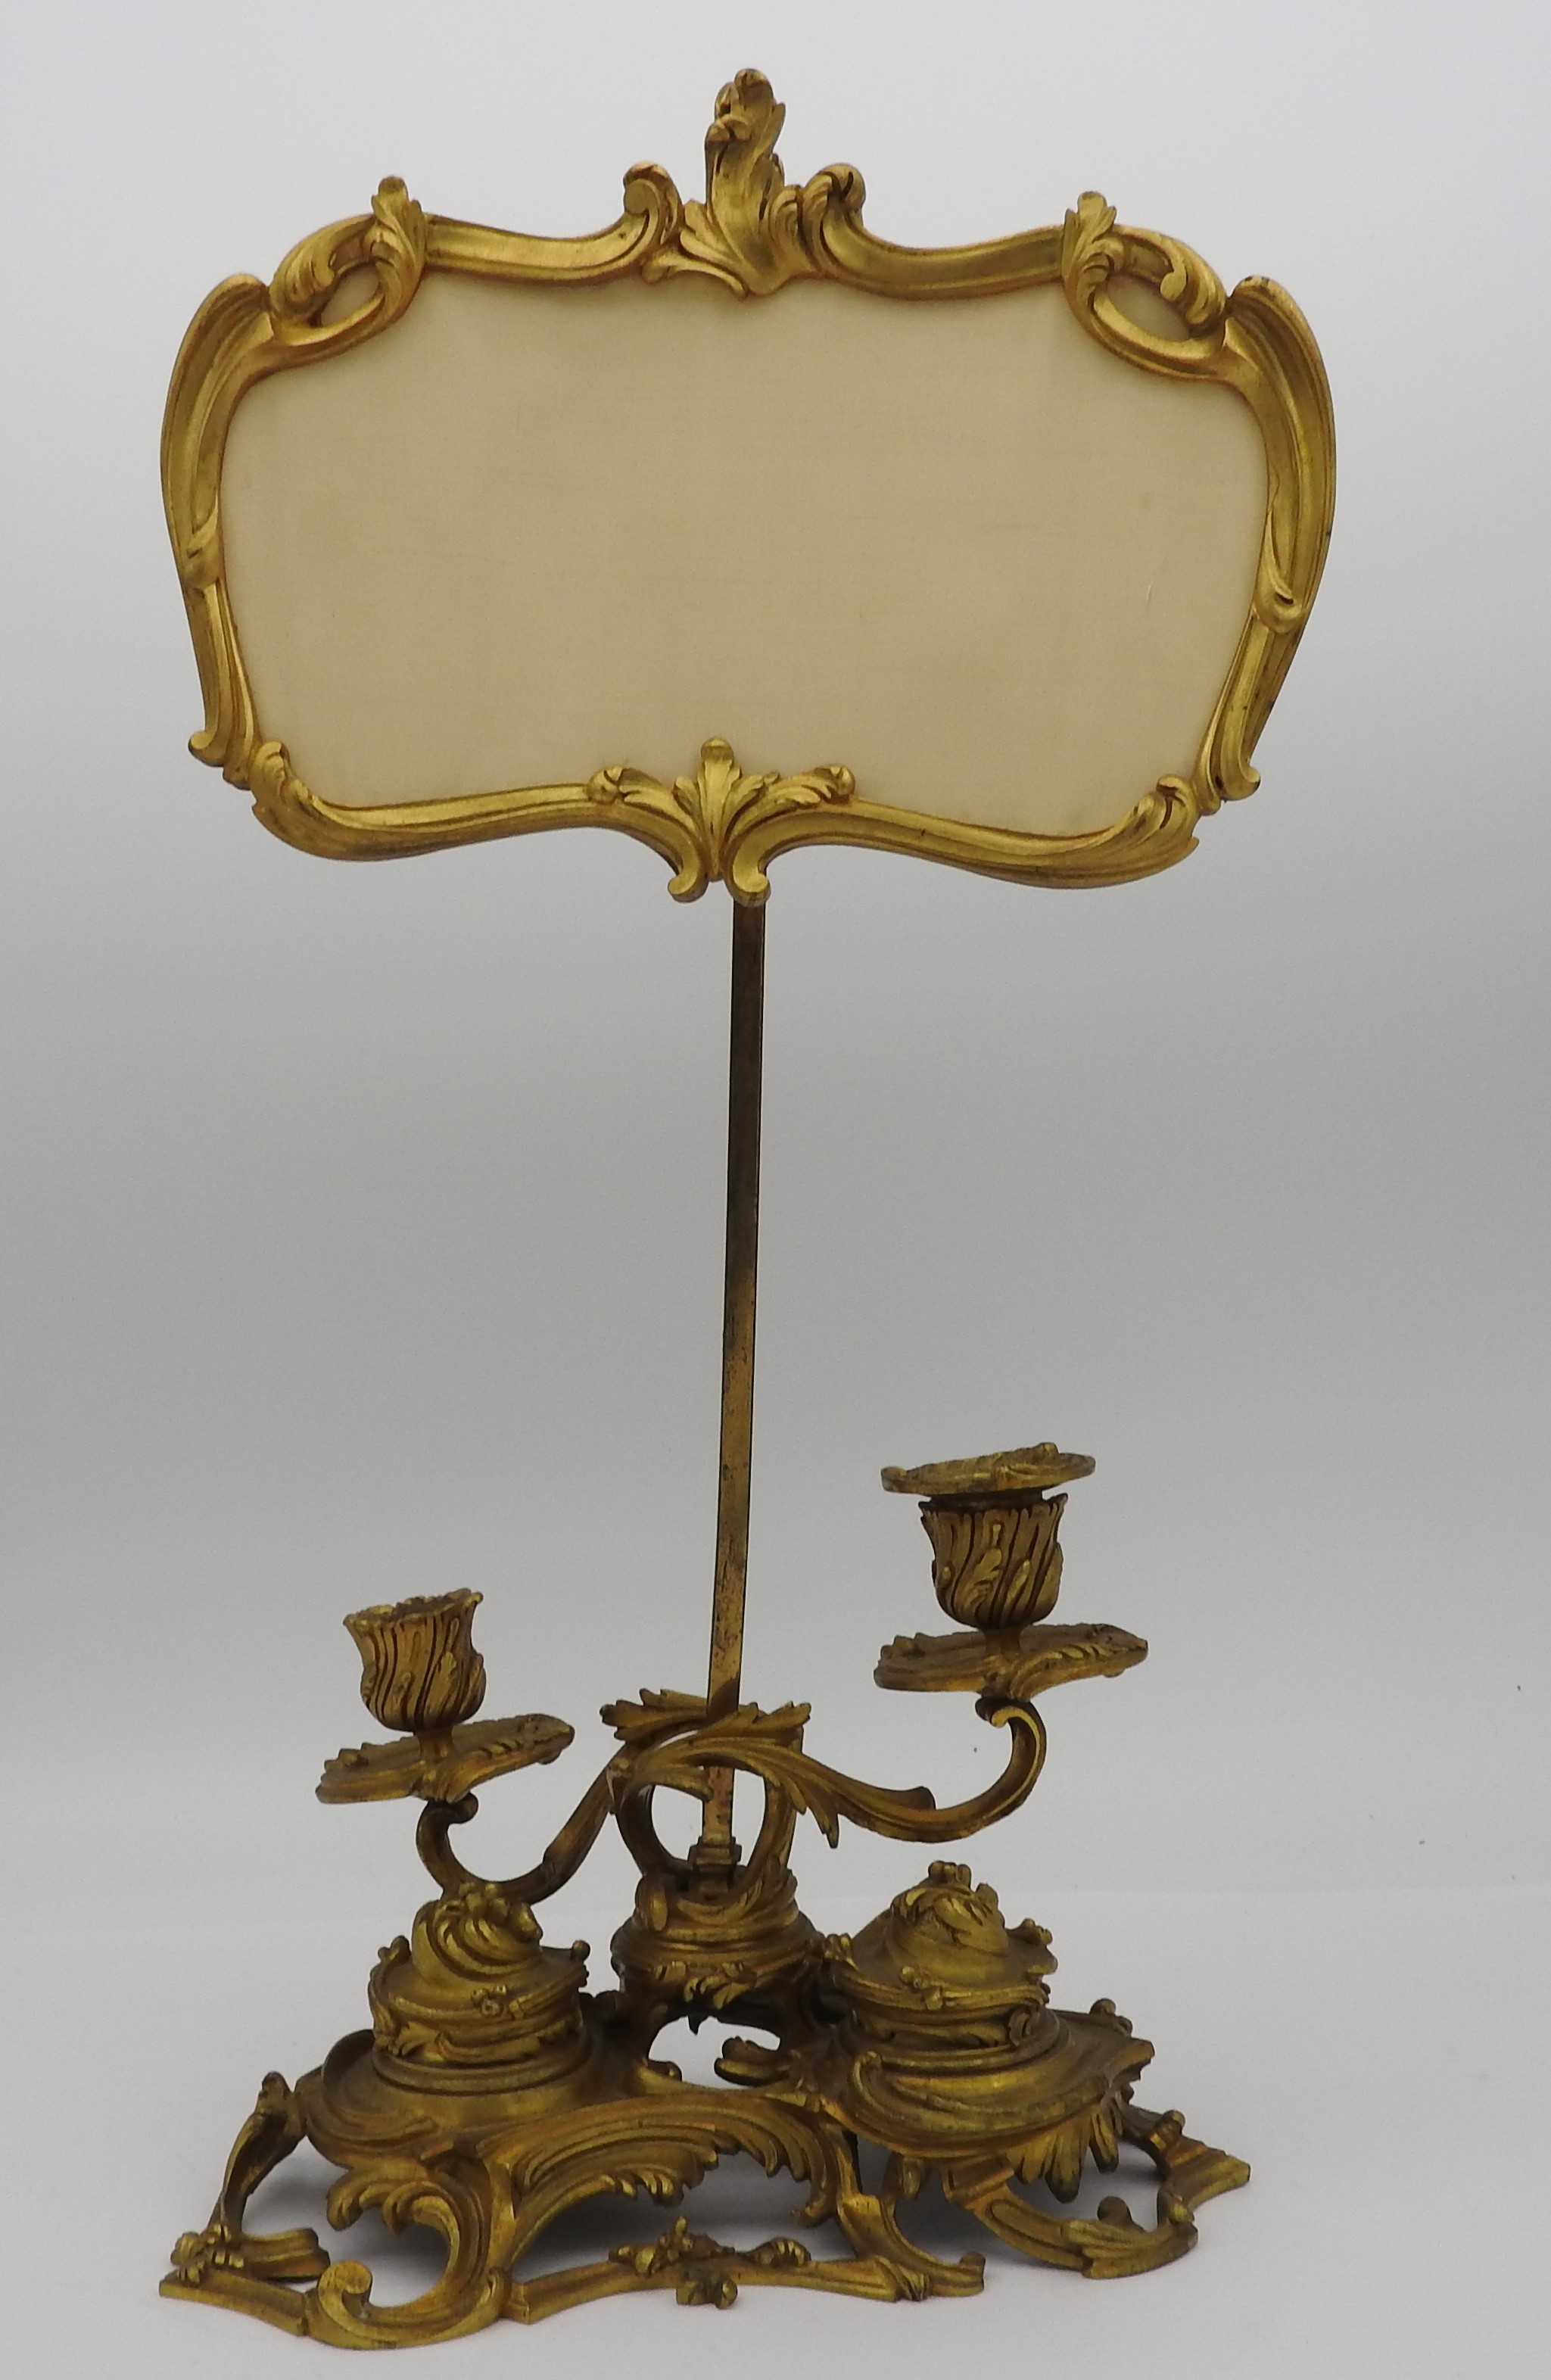 AN UNUSUAL FRENCH GILT METAL ROCOCO INK STAND, EARLY 19TH CENTURY, adjustable cartouche shaped